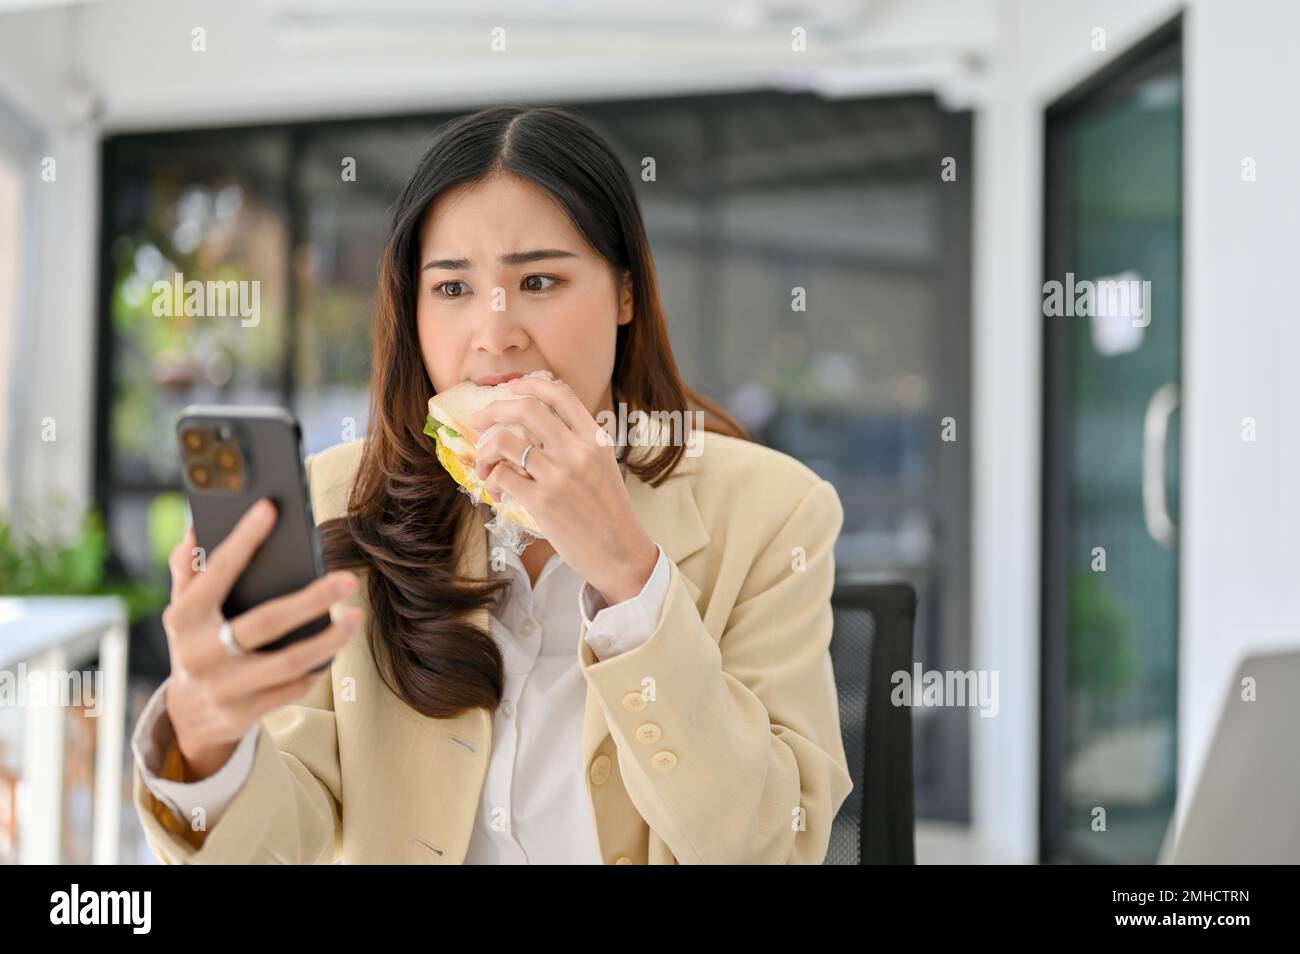 Hungry and busy millennial Asian businesswoman eating a sandwich while replying or checking her clients email on the phone. busy lifestyle concept Stock Photo